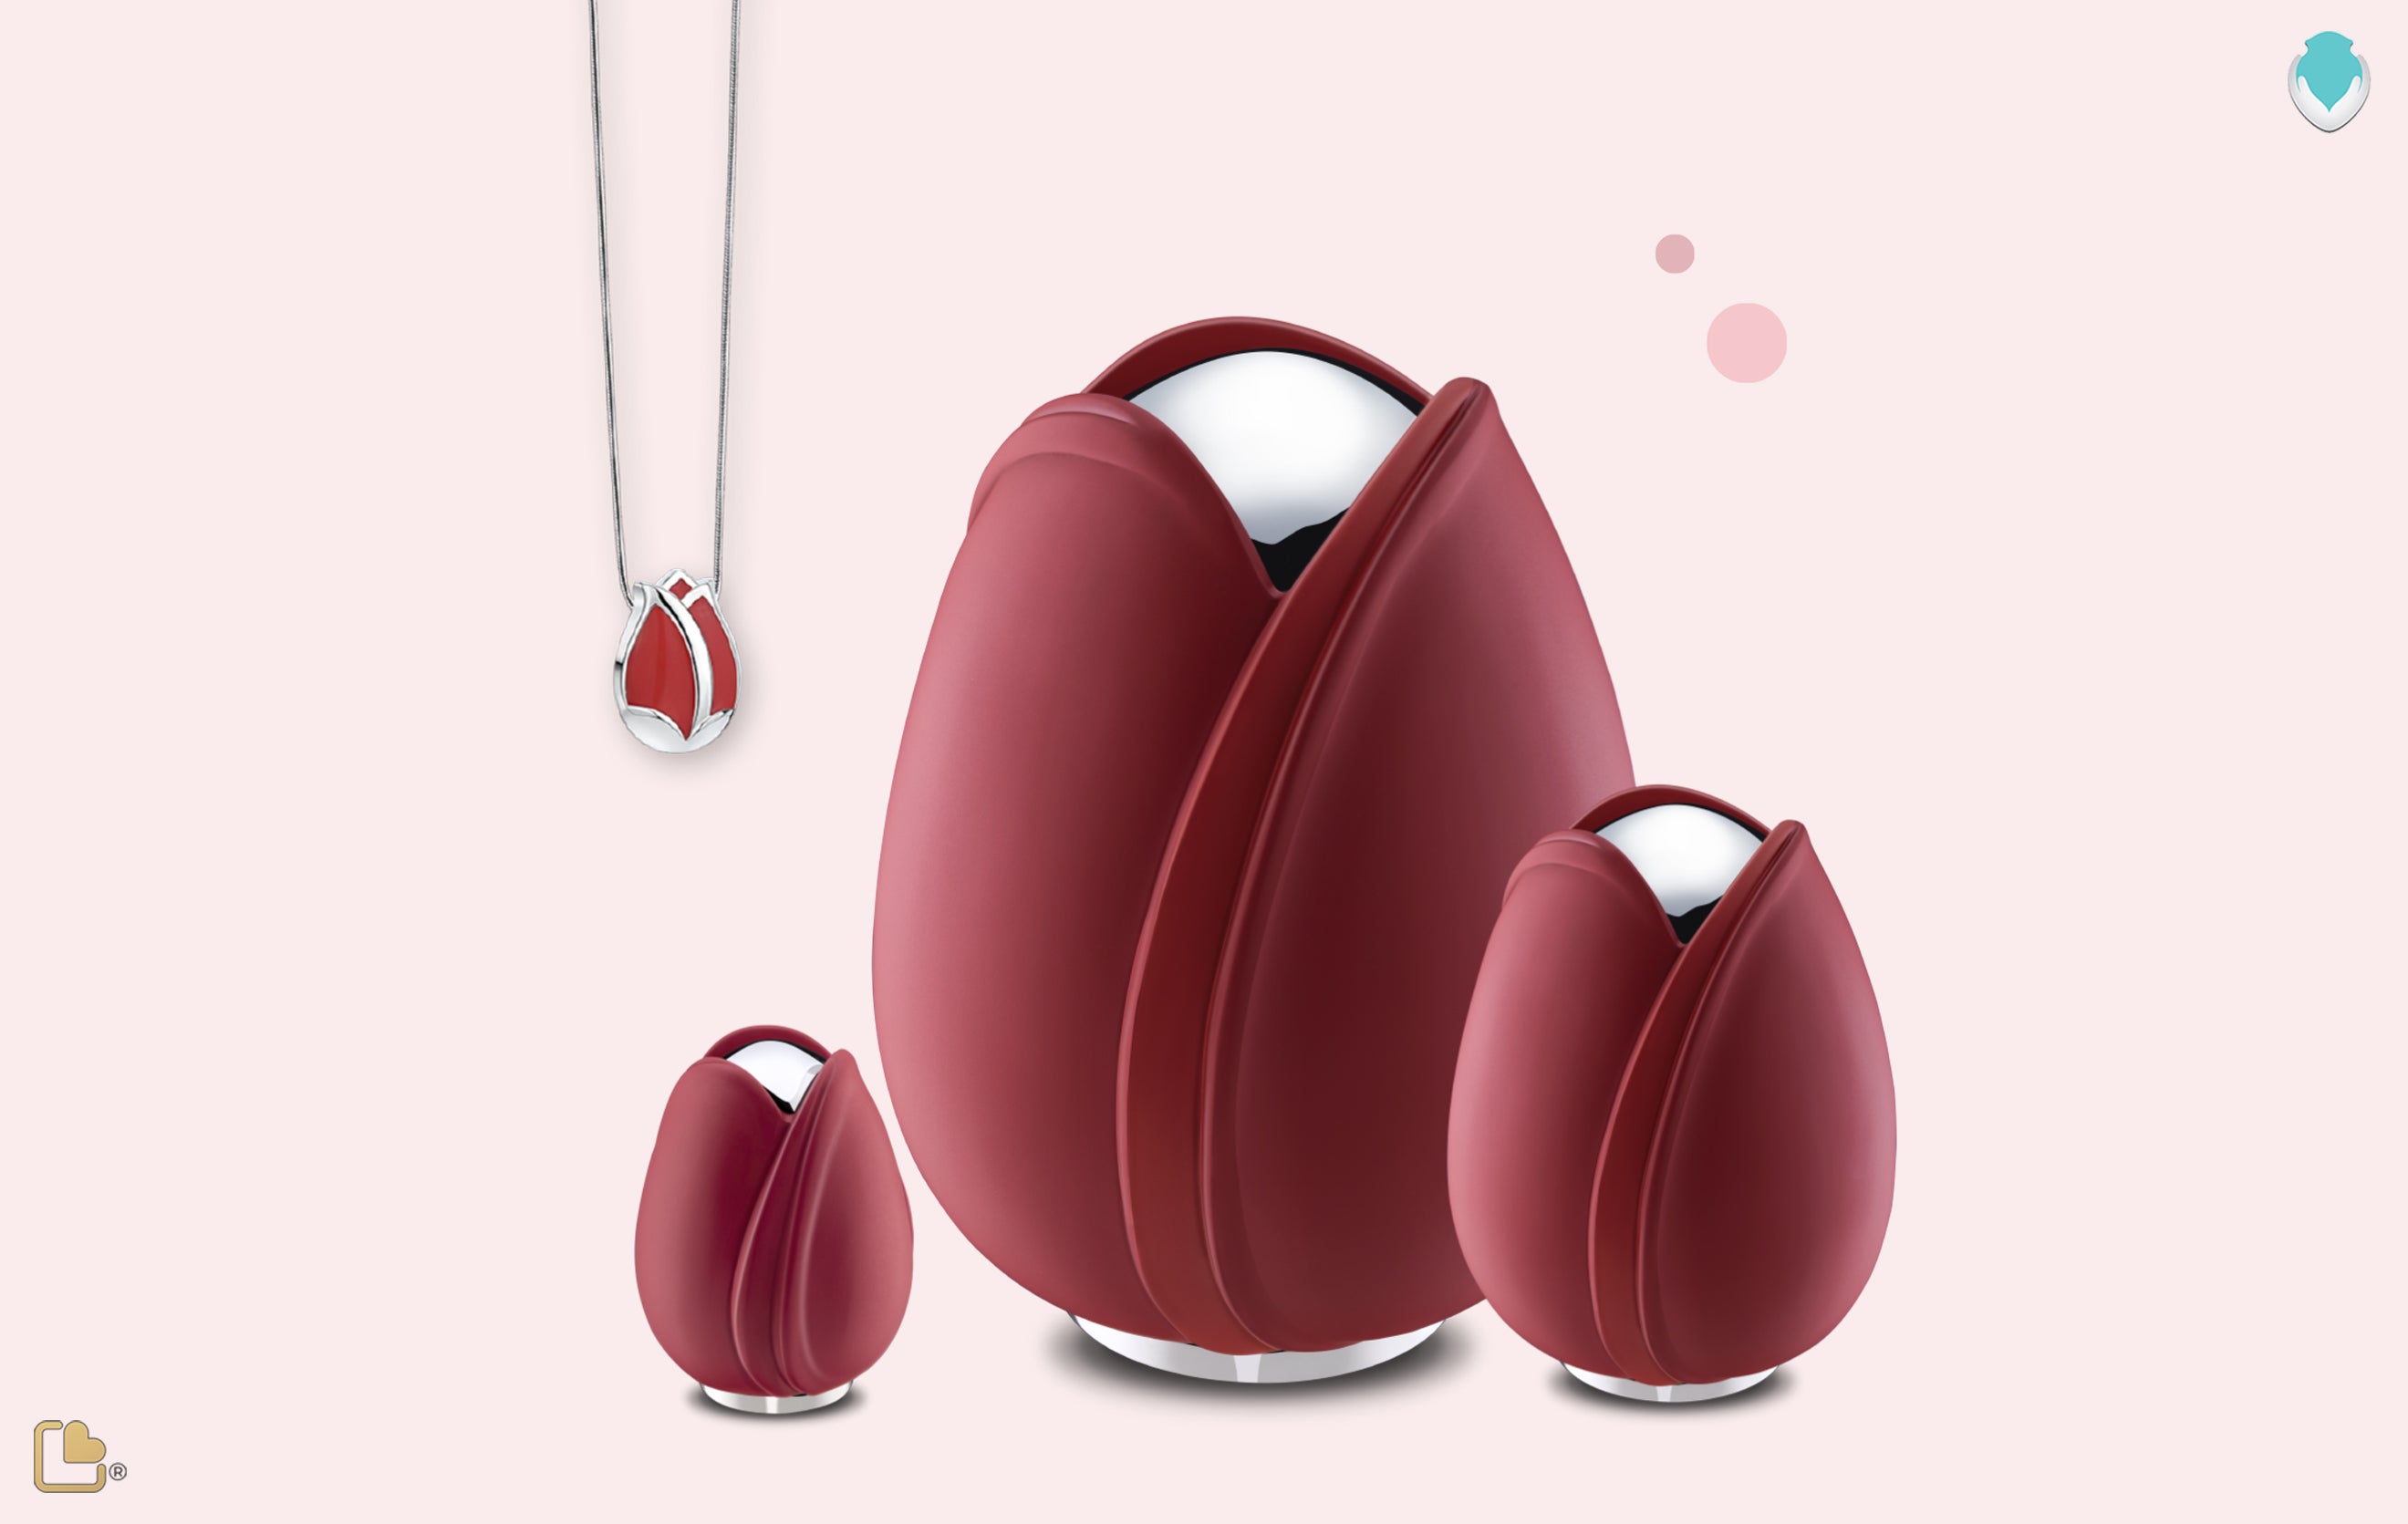 Tulip-shaped cremation urns in Red & Polished Silver color